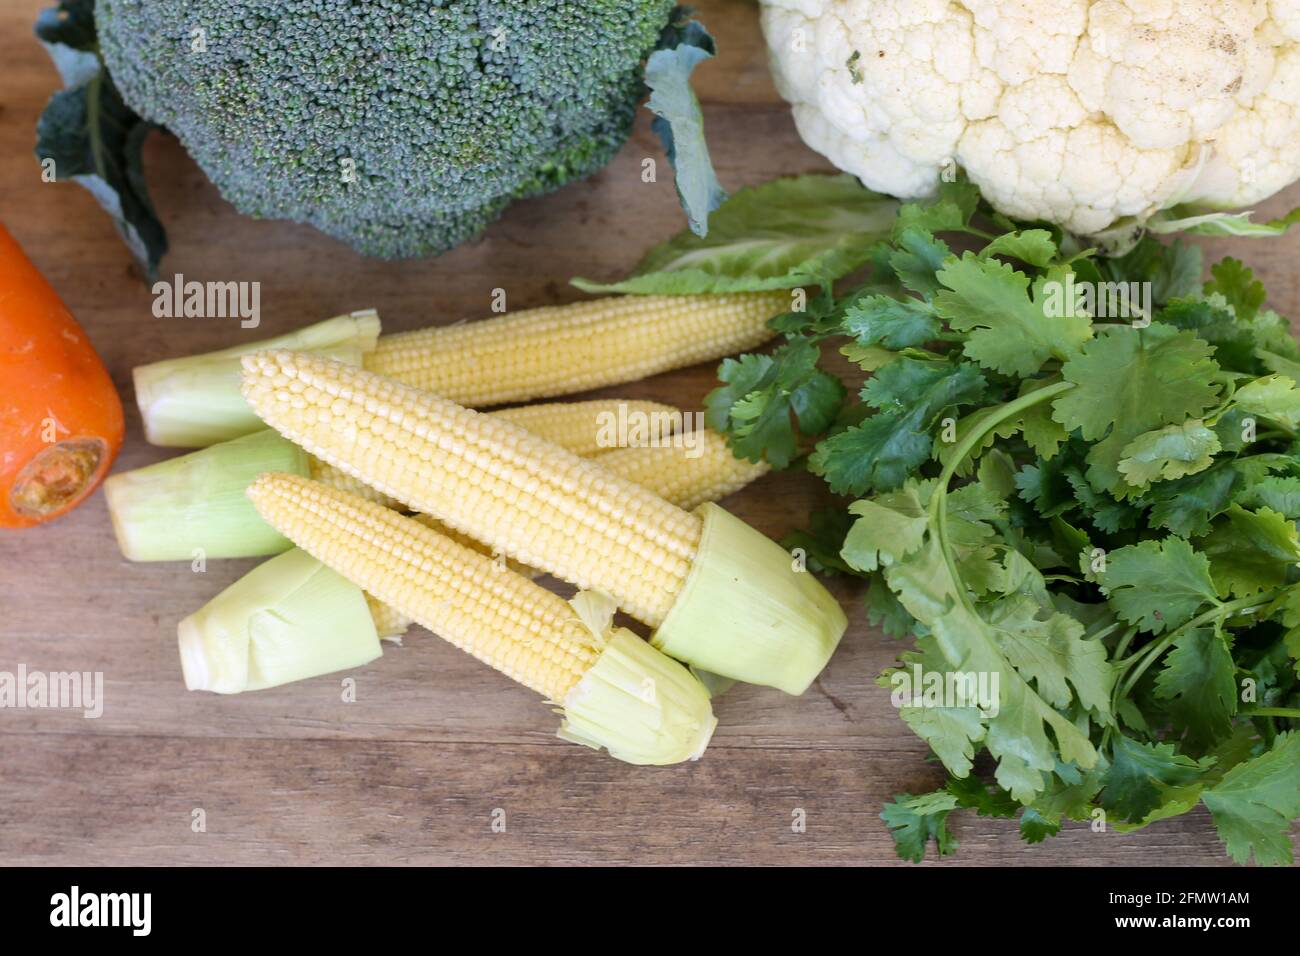 A collection of fresh and delicious vegetables on a wooden table Stock Photo